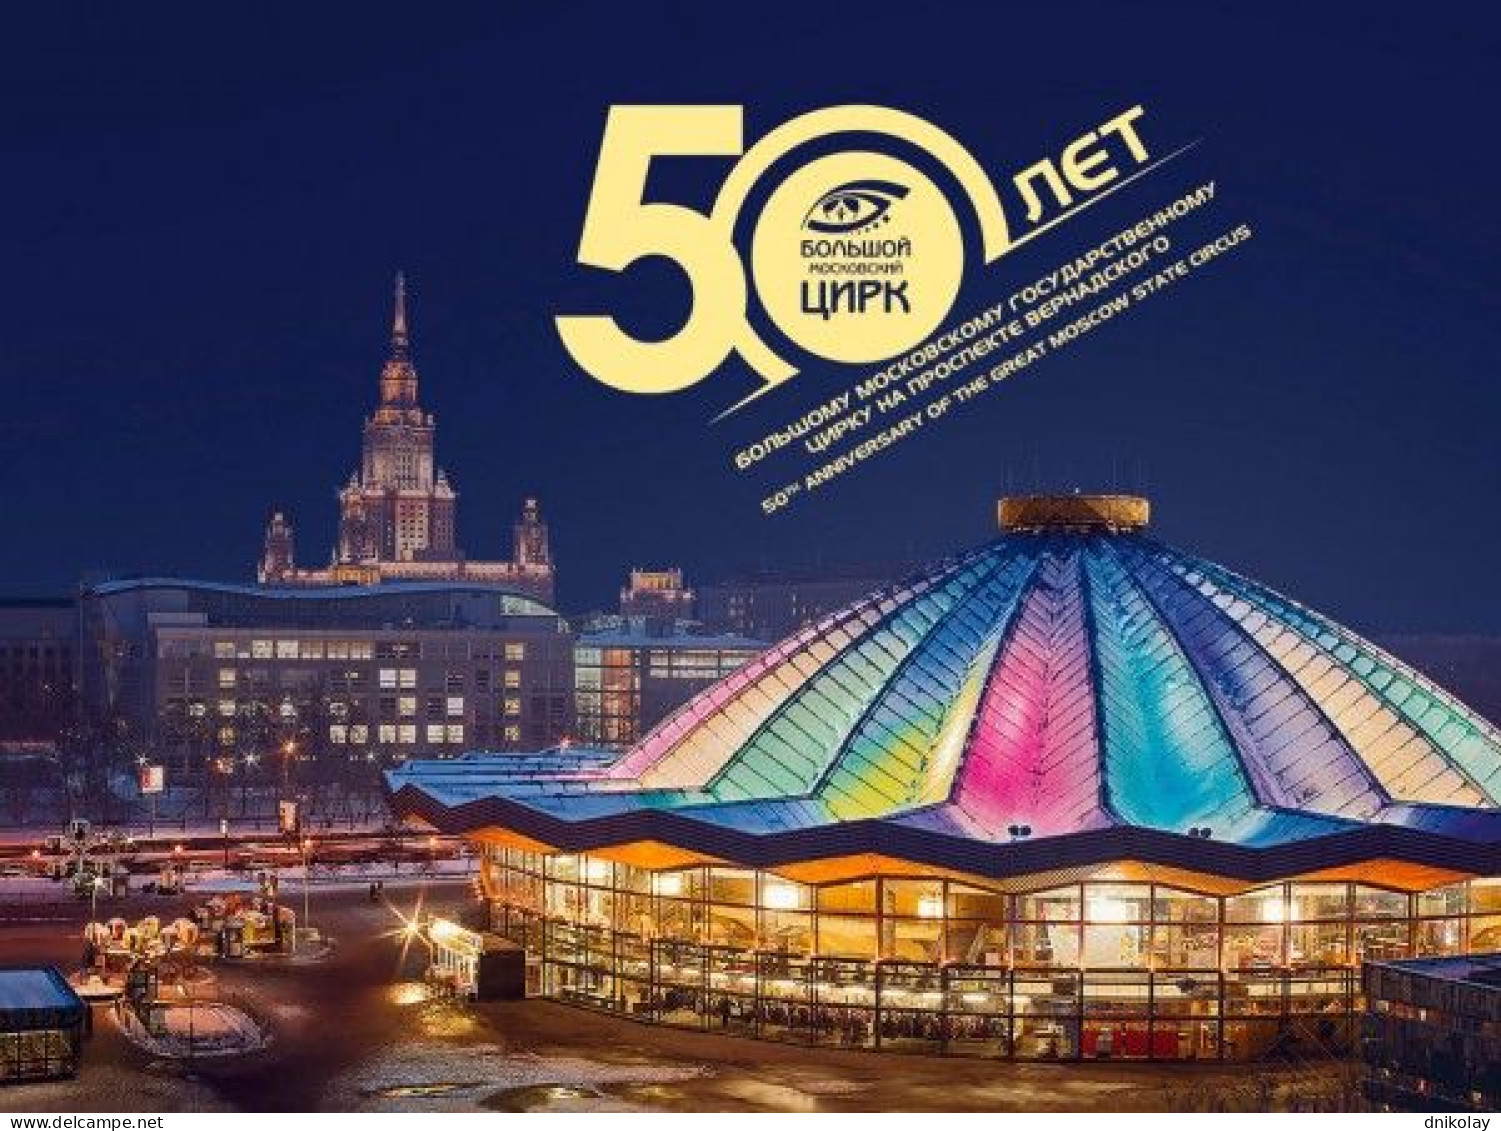 2021 3008 Russia Booklet The 50th Anniversary Of The Great Moscow State Circus On Vernadsky Avenue MNH - Ongebruikt